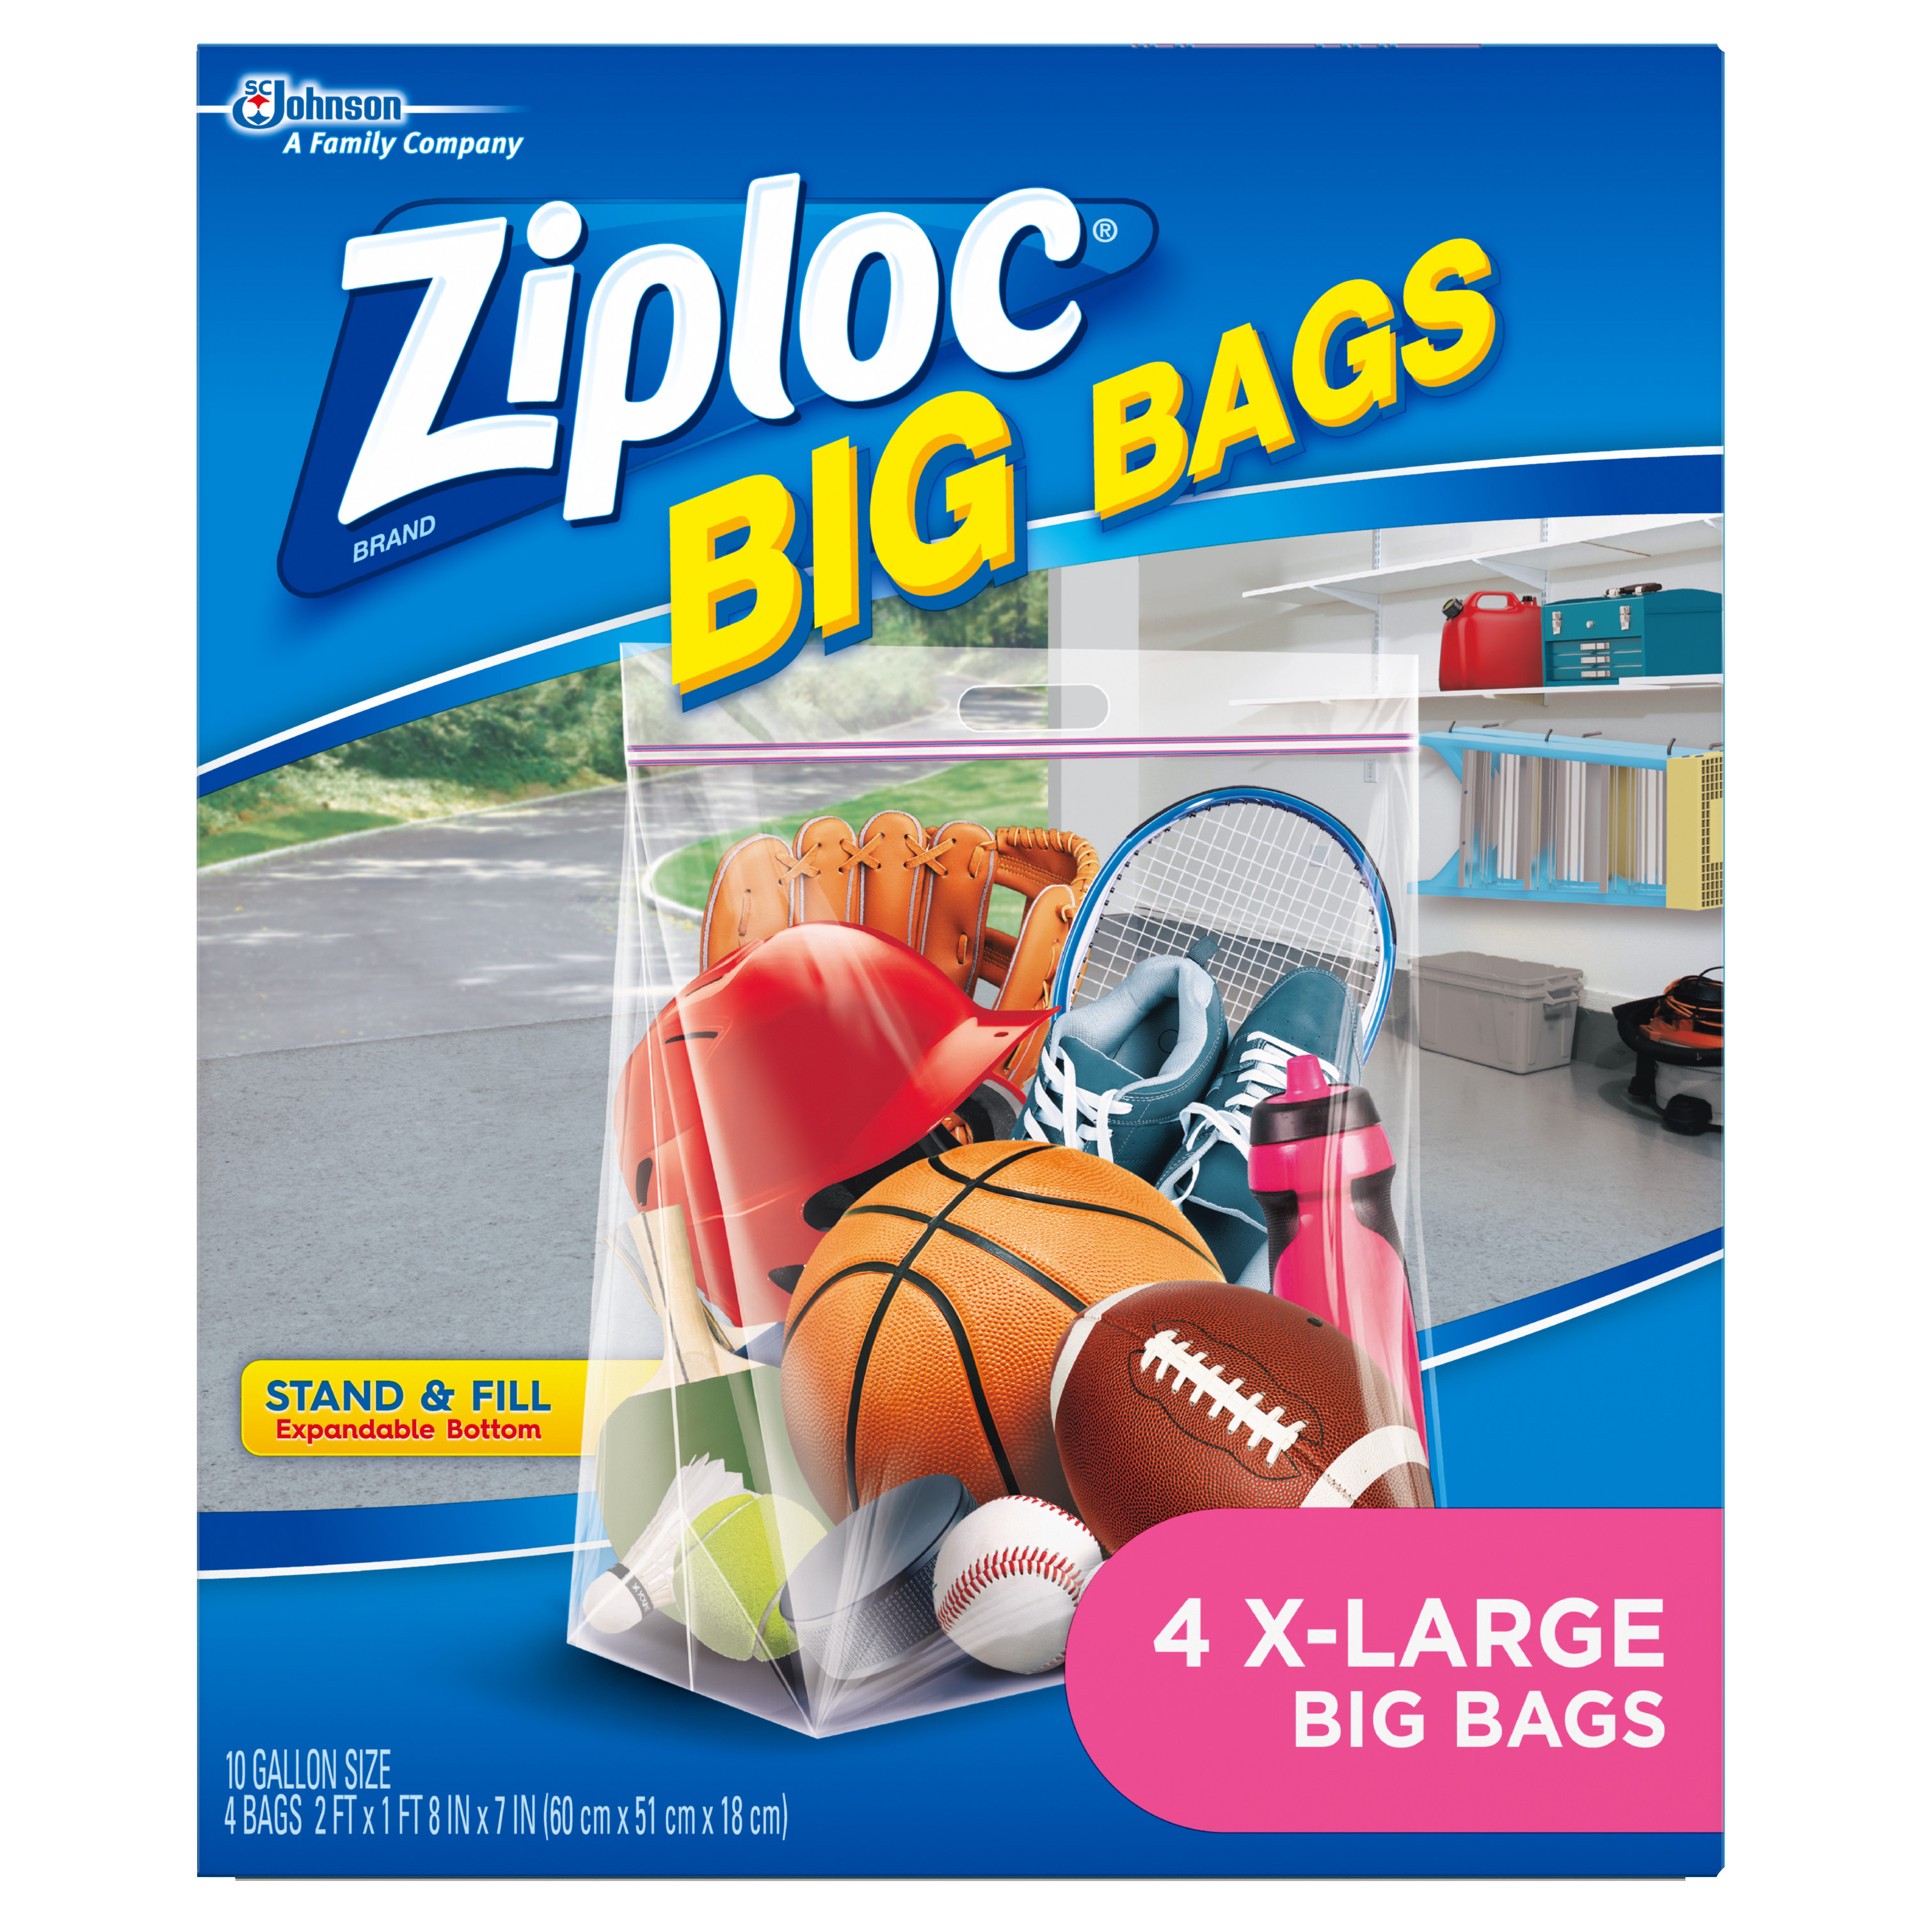 slide 5 of 5, Ziploc Big Bags, X-Large, Secure Double Zipper, 4 CT, Expandable Bottom, Heavy-Duty Plastic, Built-In Handles, Flexible Shape to Fit Where Storage Boxes Can't, 4 ct